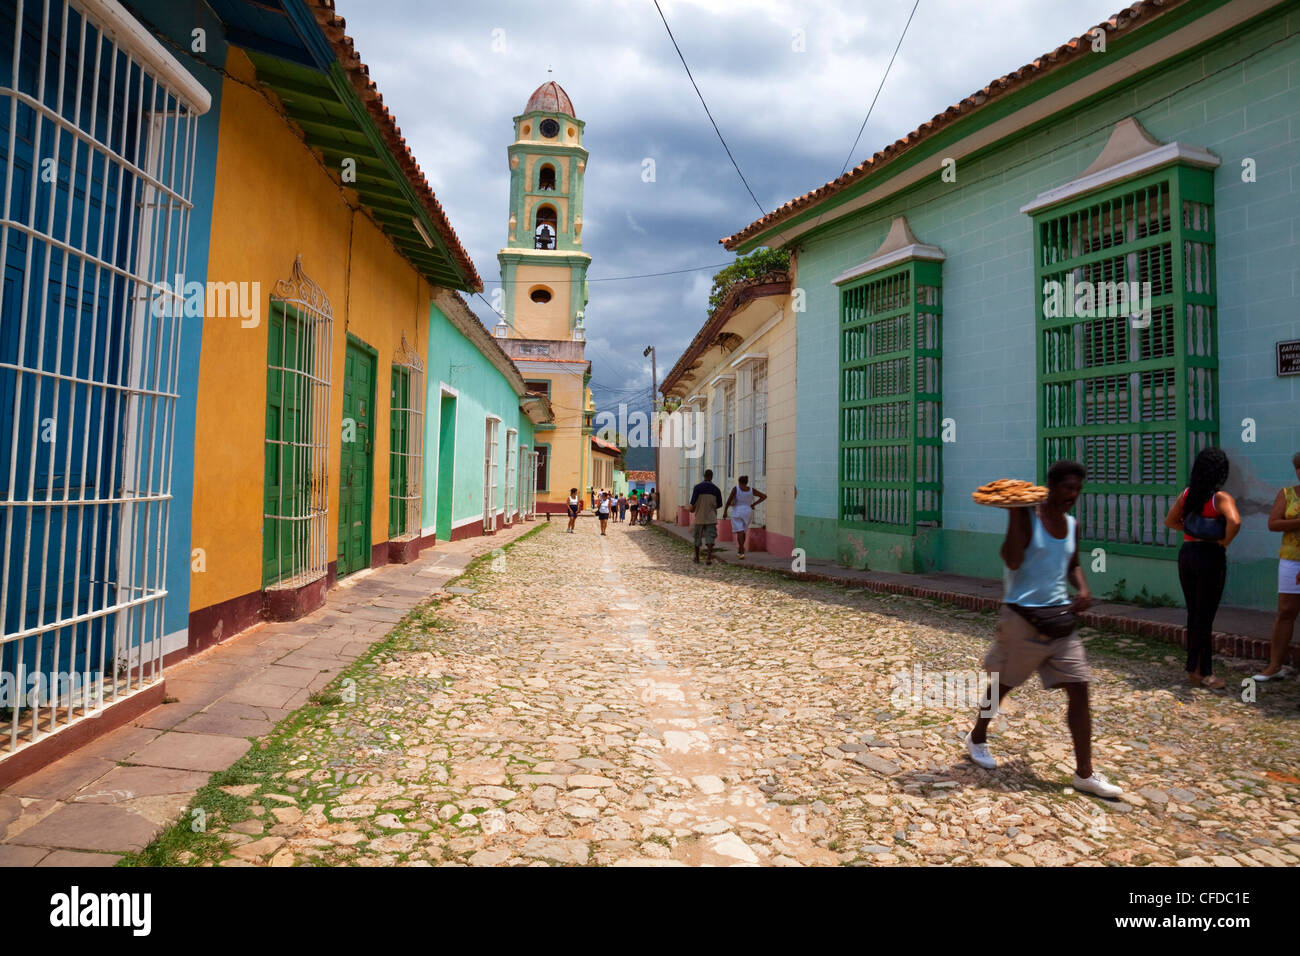 Man carrying tray of pastries along street in Trinidad, Sancti Spiritus Province, Cuba, West Indies, Central America Stock Photo